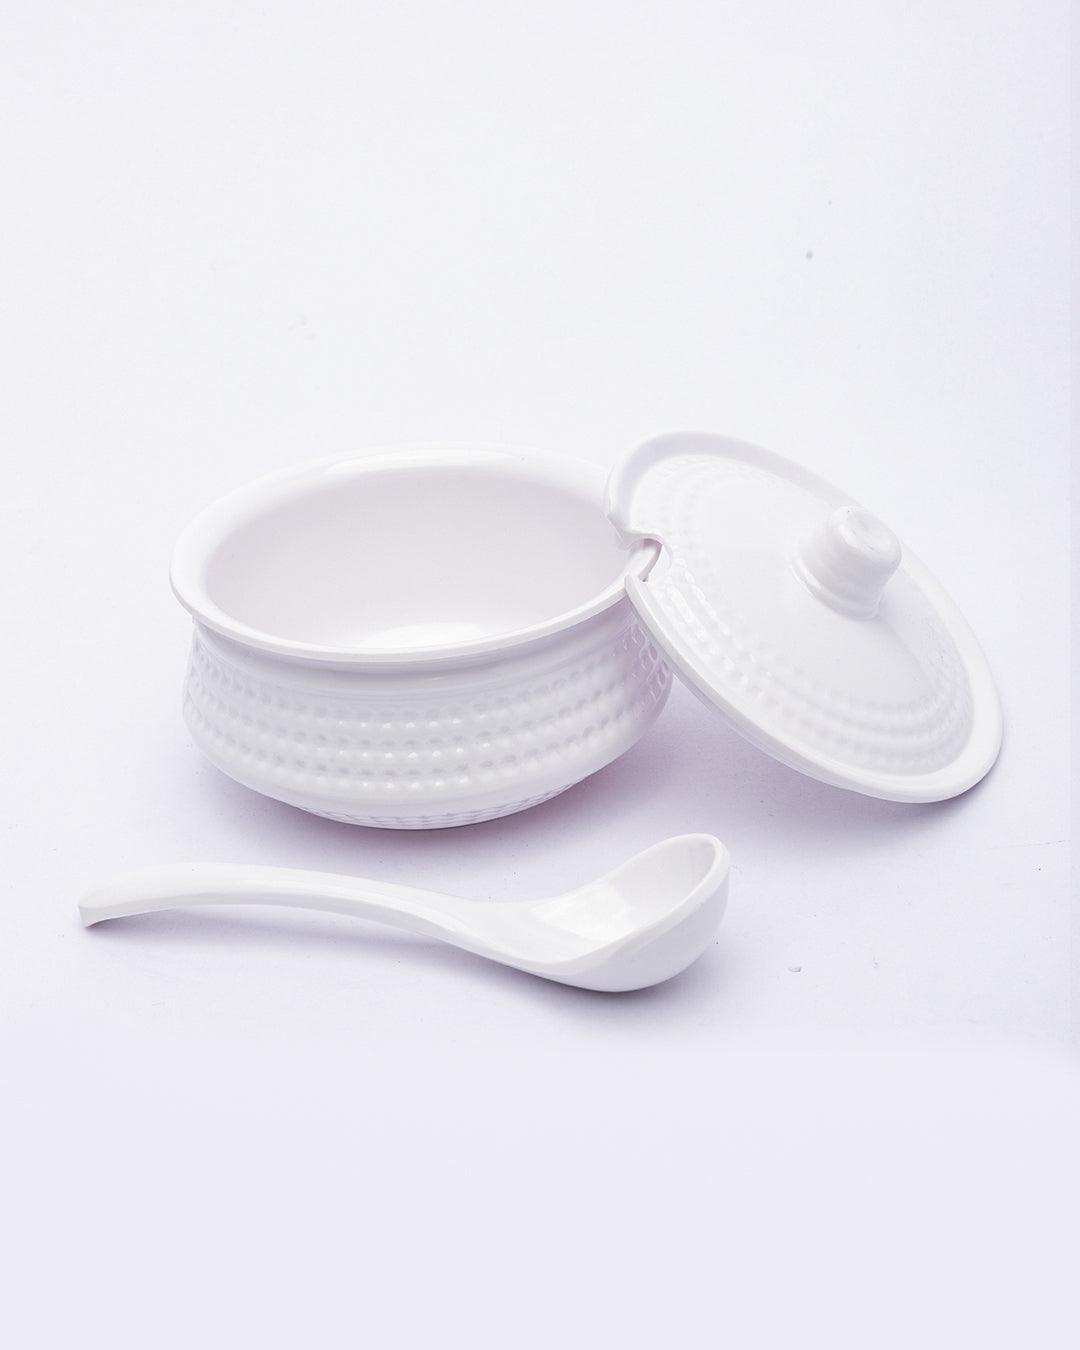 Condiment Set with Lids & Spoon, Serving Condiment Tray, For Home & Kitchen, White Colour, Melamine, Set of 3 - MARKET 99